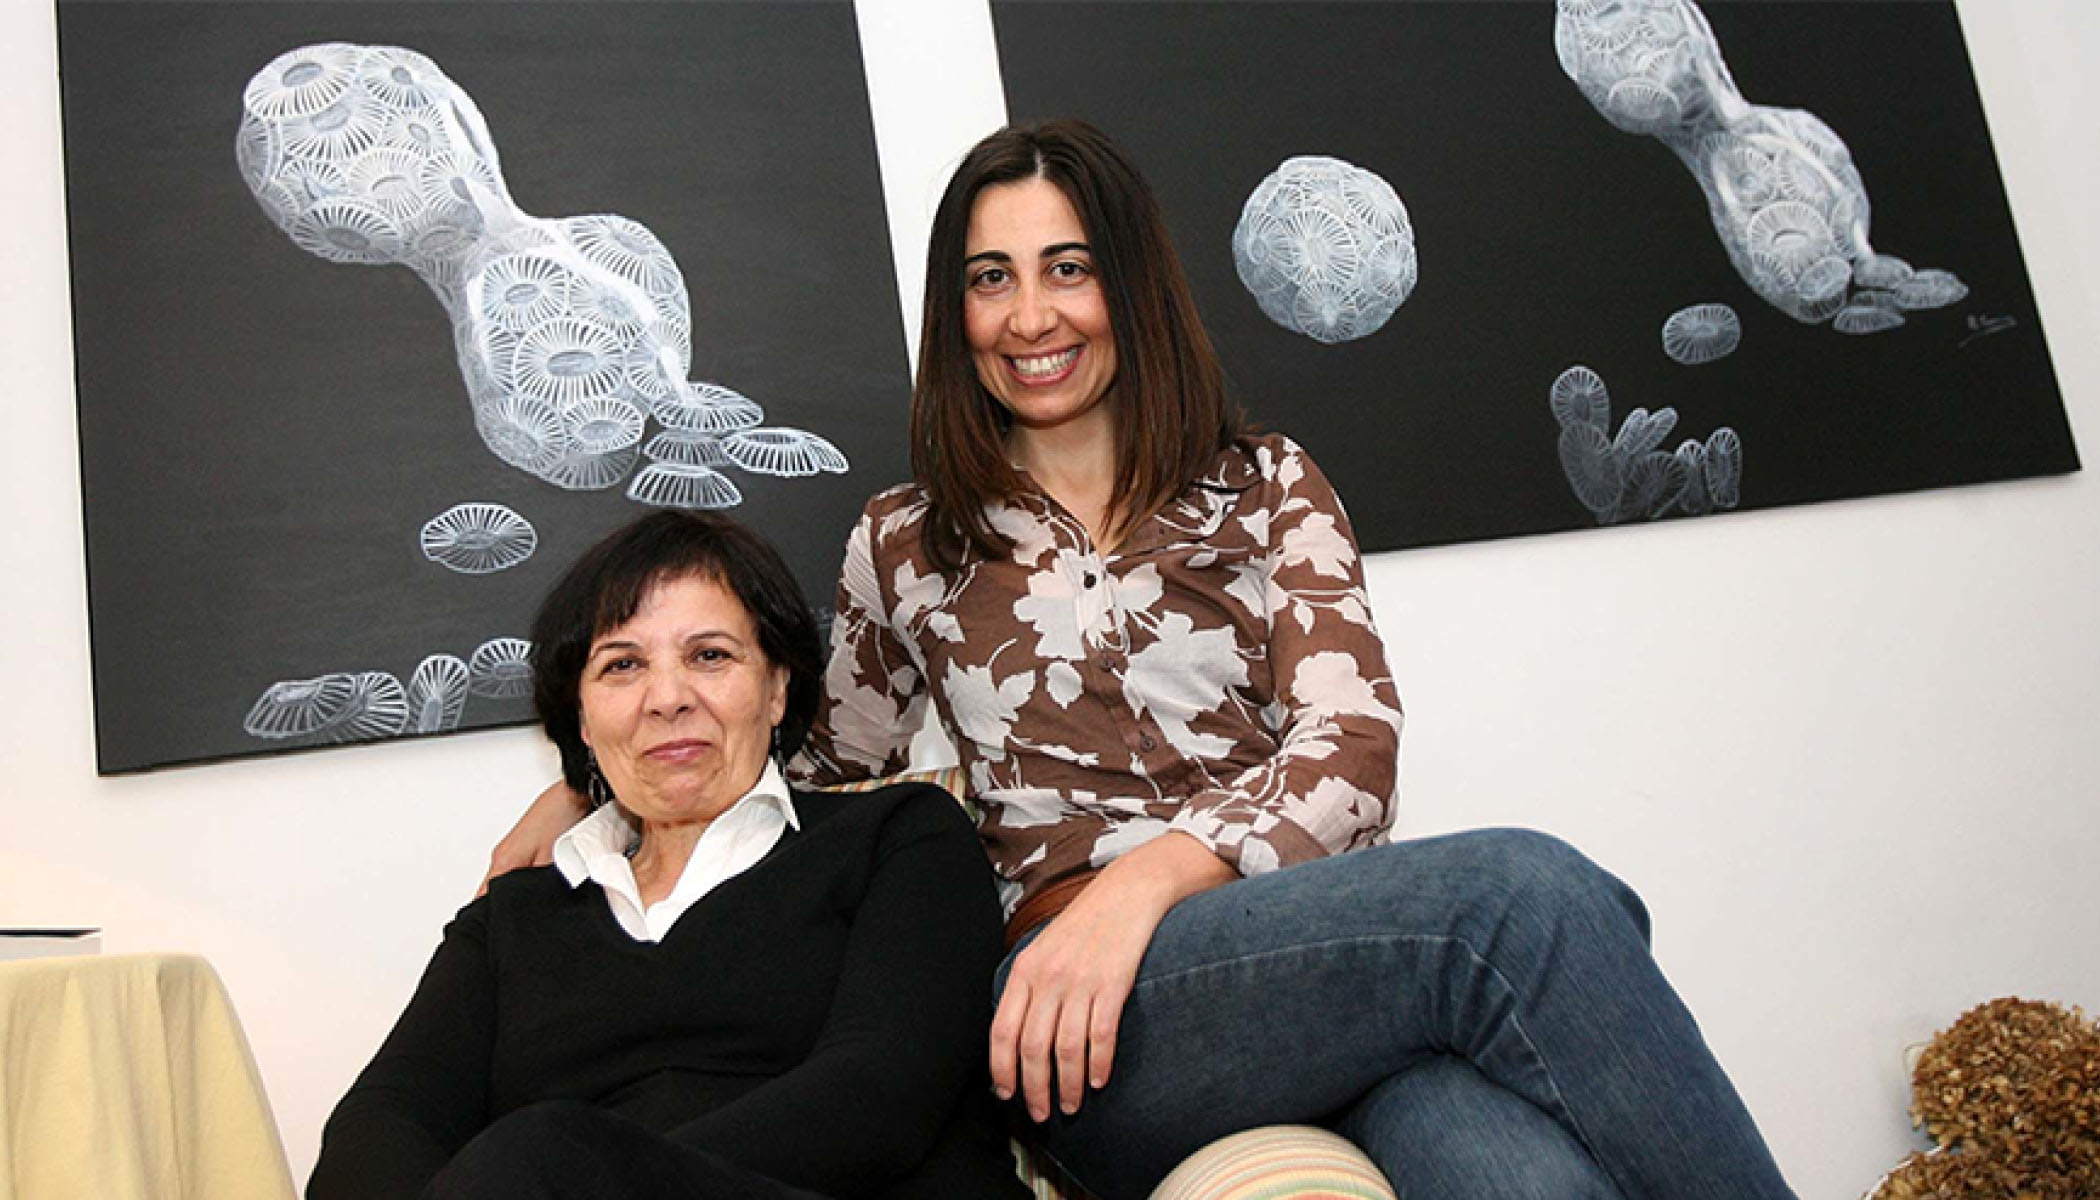 Two women sit side-by-side, the woman on the left wears a black sweater and white shirt, the woman on the right wears a brown, patterned shirt. On the wall behind them are two black and white paintings of coccolithophores.